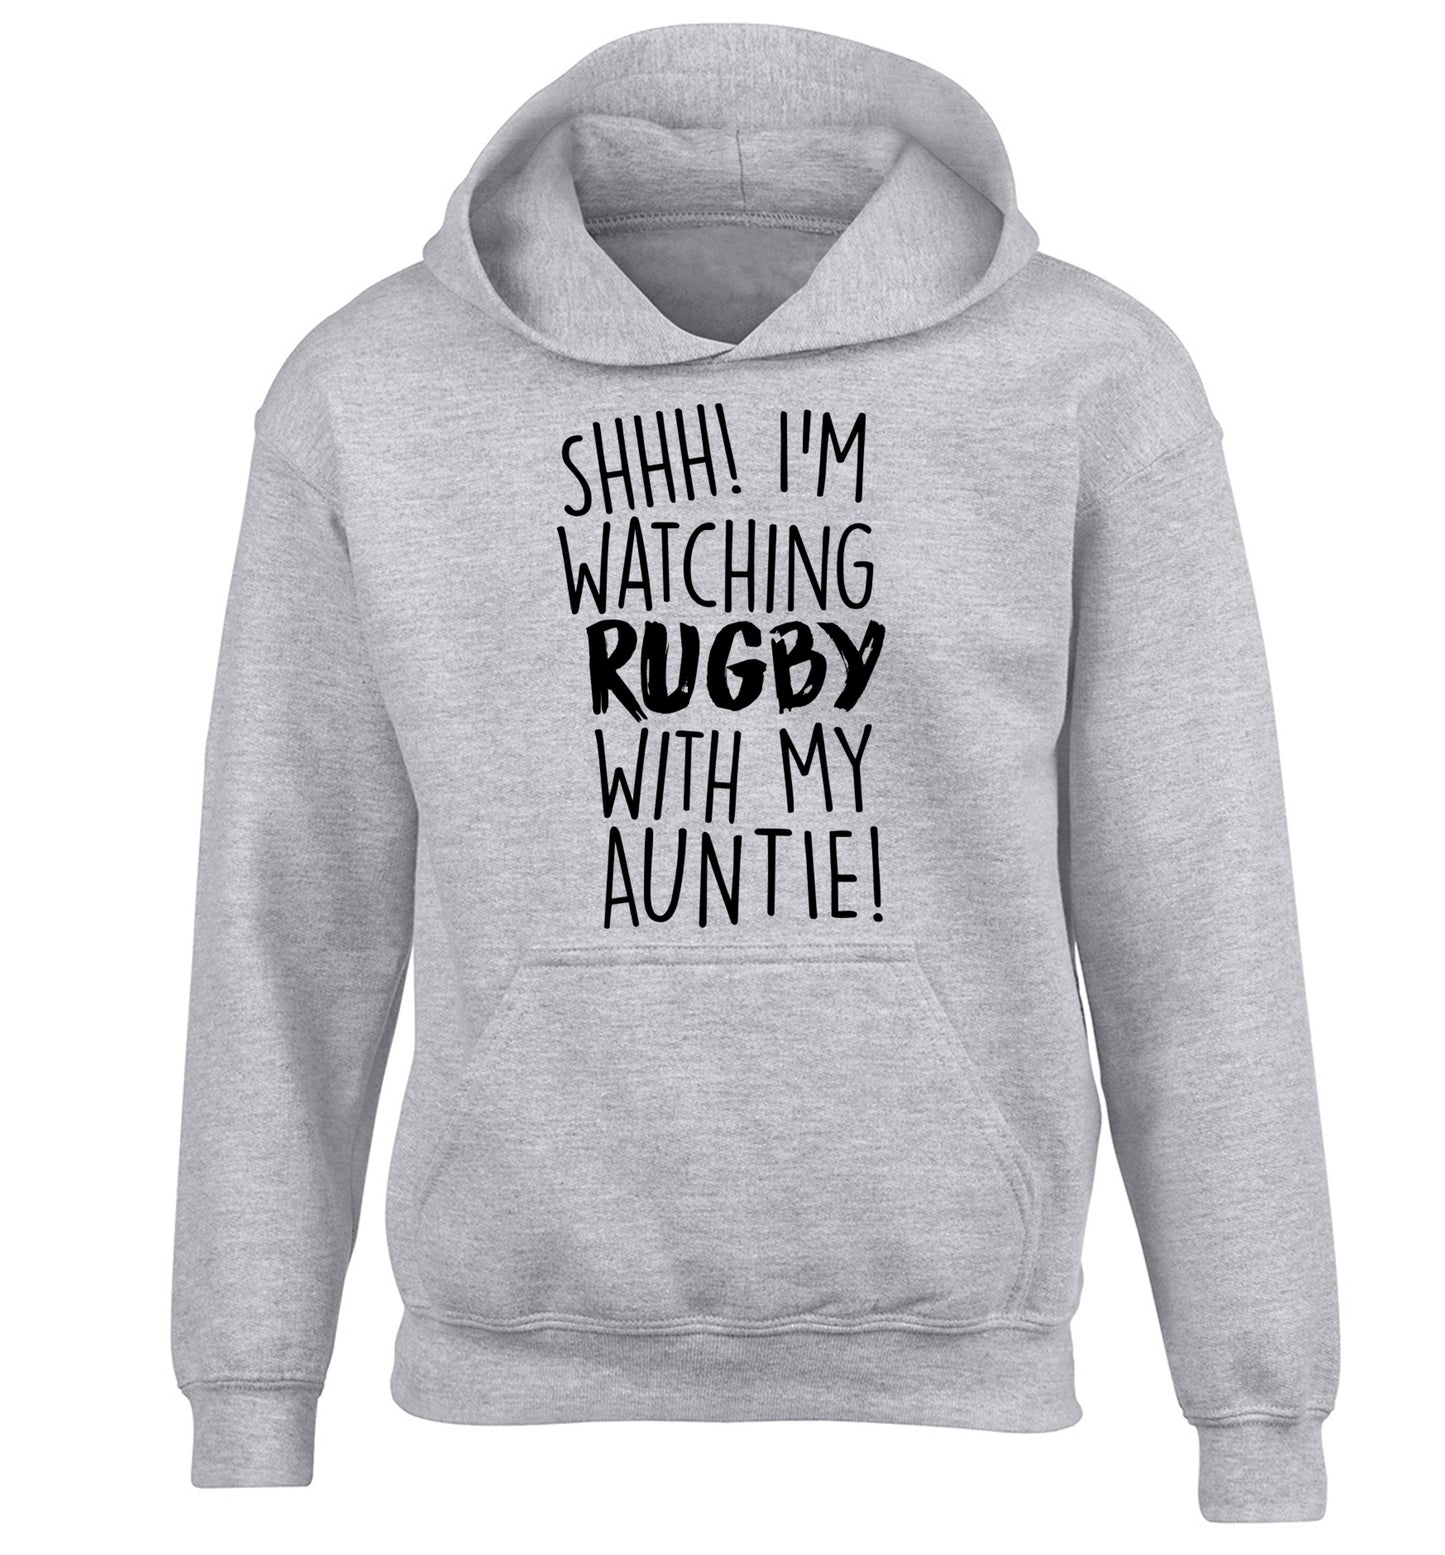 Shhh I'm watchin rugby with my auntie children's grey hoodie 12-13 Years